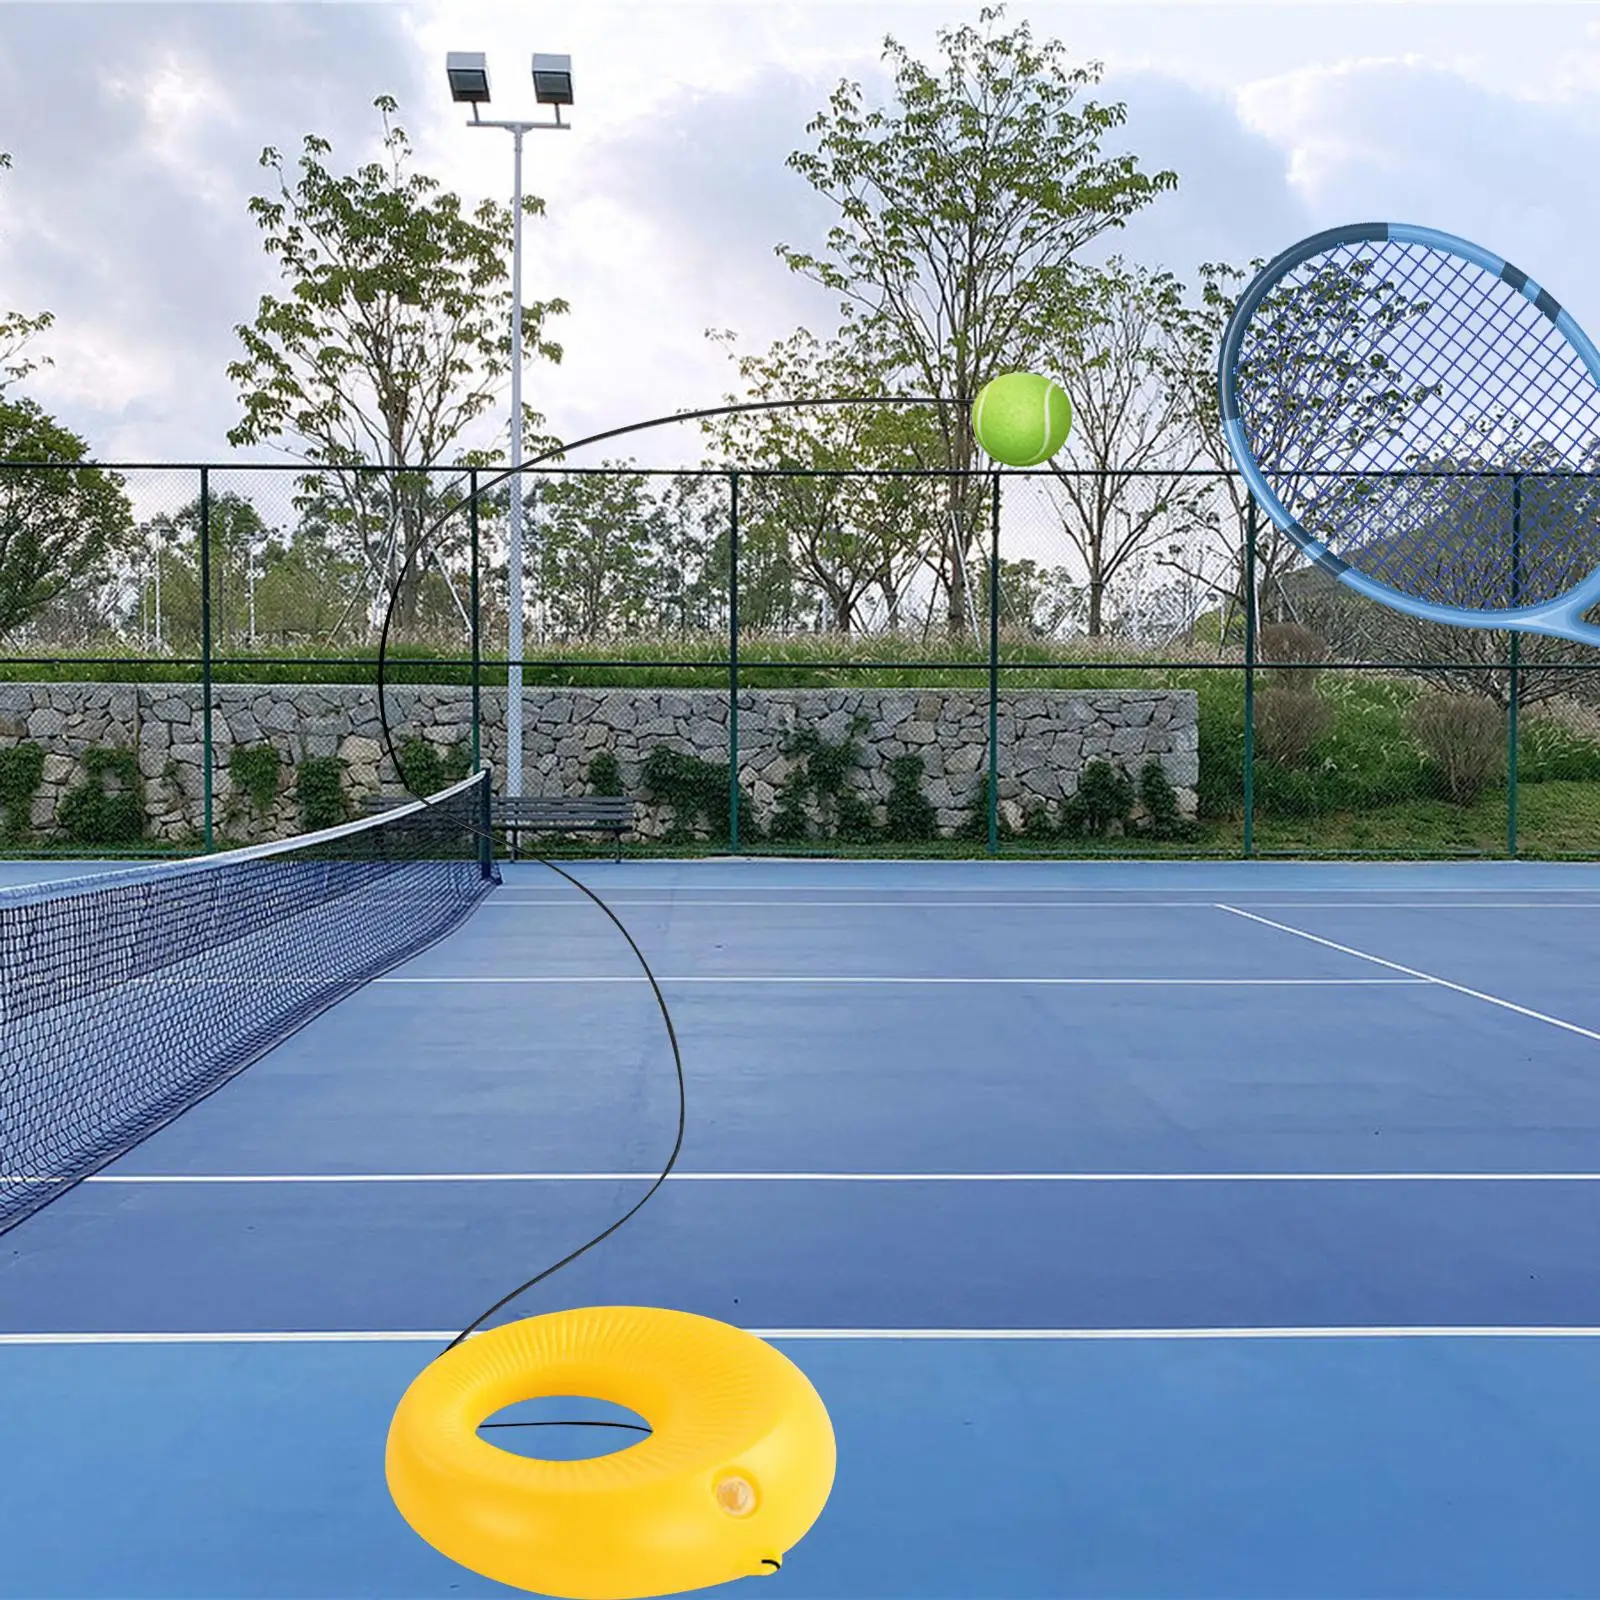 Tennis Rebounder with String Parent Child Interactive Toy Exerciser System